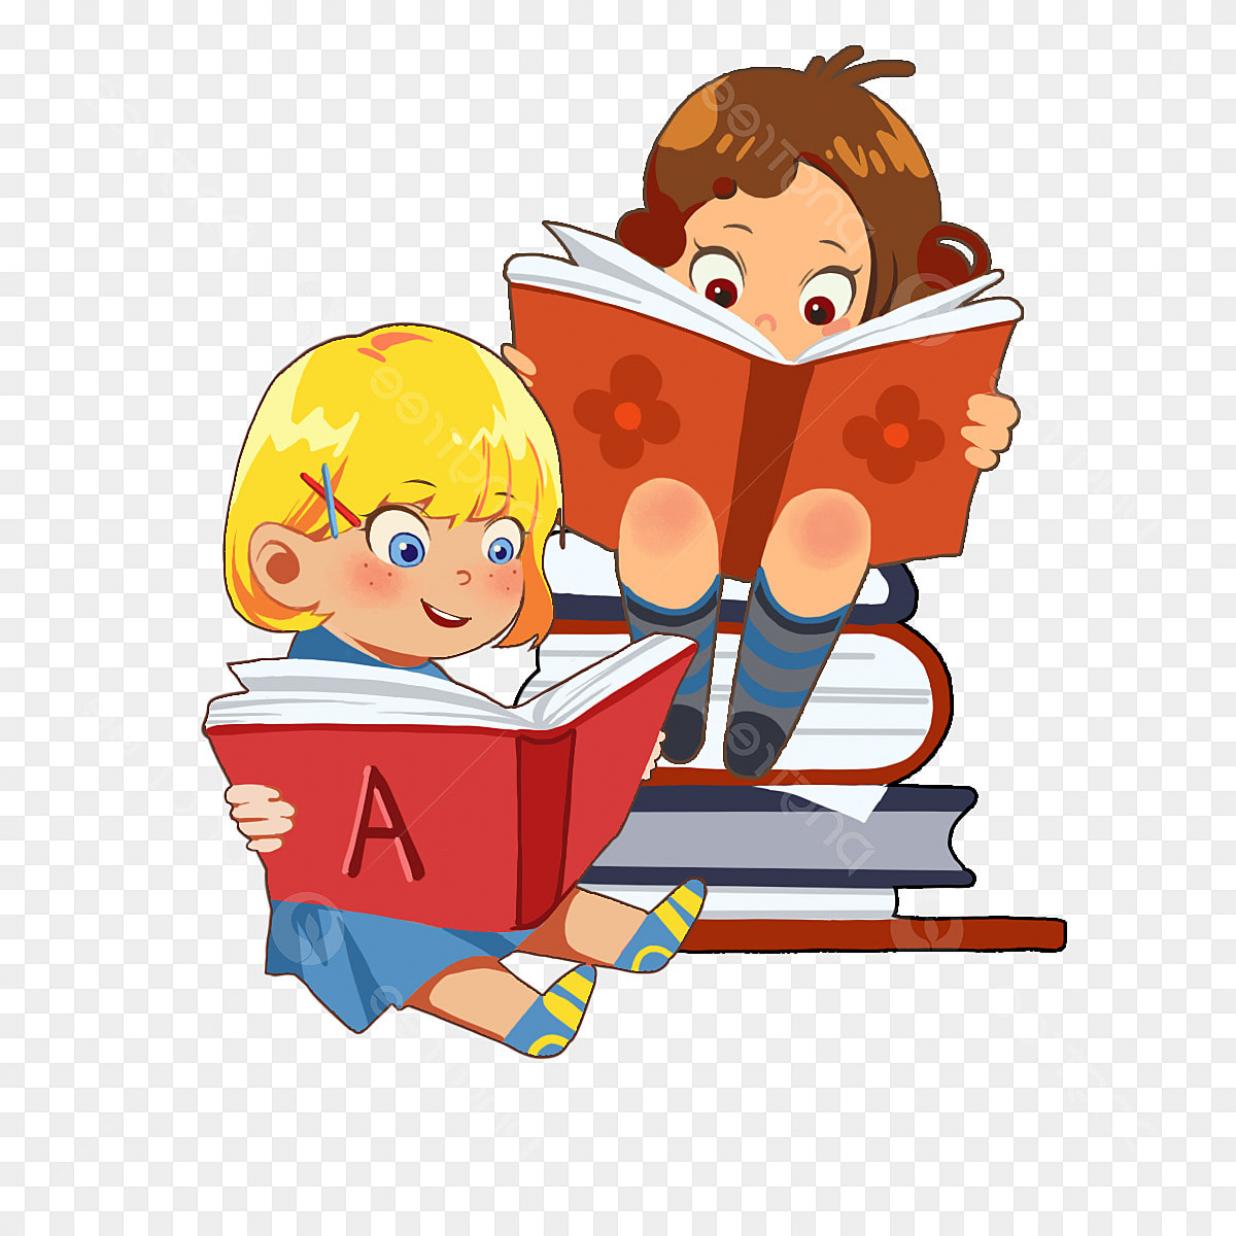 Reading Clipart Images - Free Download on Freepik